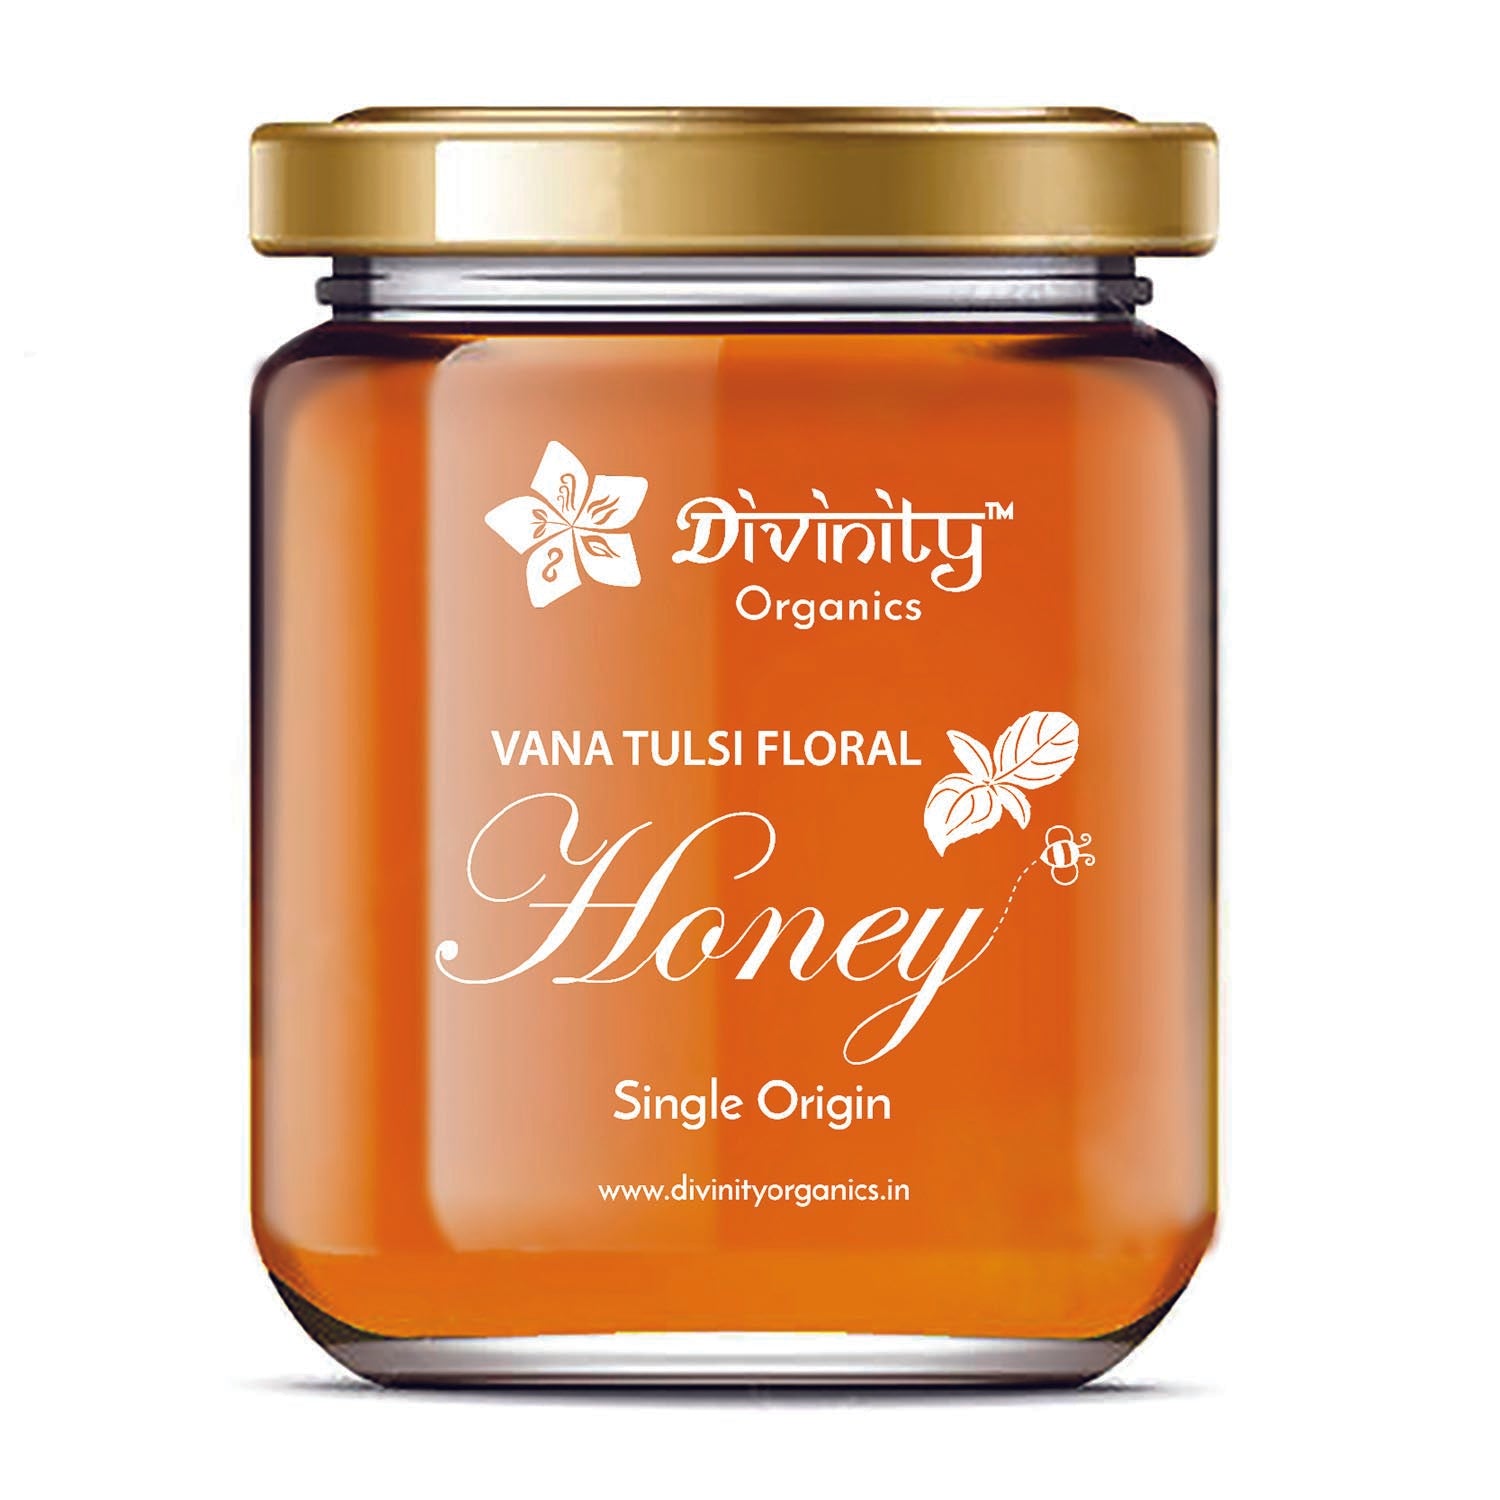 Divinity Organics - Vana Tulsi Honey: A magical elixir, honey made from the medicinal flower, vana tulsi that detoxifies and revitalizes your skin and body. It is one of the most ancient herbs and is known to have healing properties. It is especially known to cure cough, cold, and certain respiratory disorders. Adding this product to your diet will give you renewed energy, ease your stress, and will let you relax. This product is often known to help customers manage anxiety.